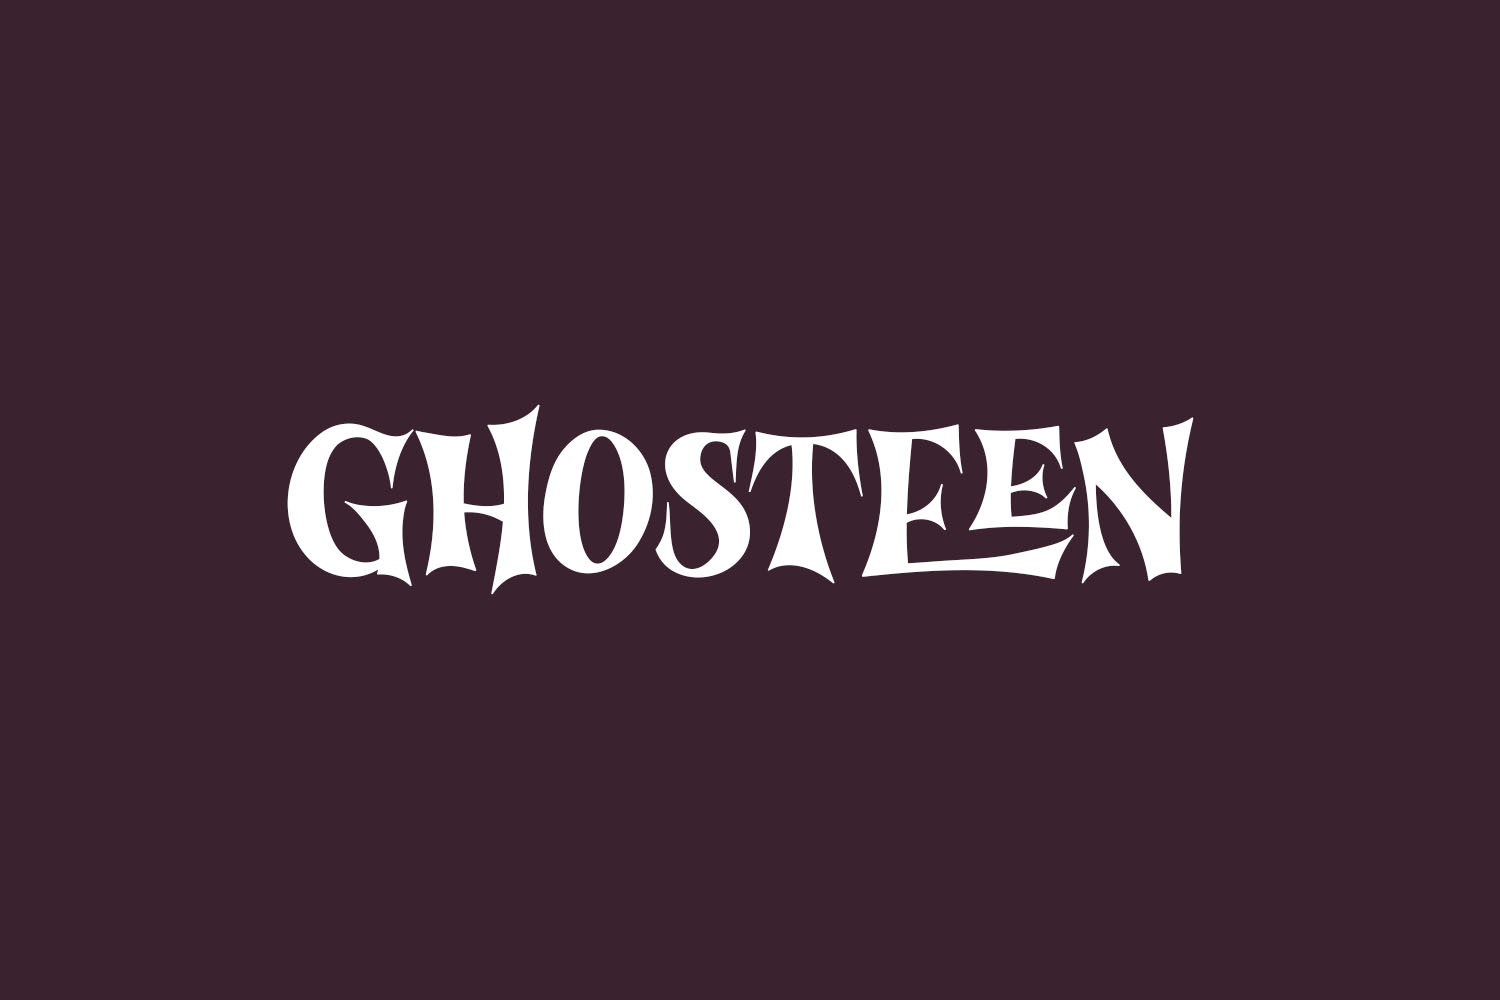 Ghosteen Free Font